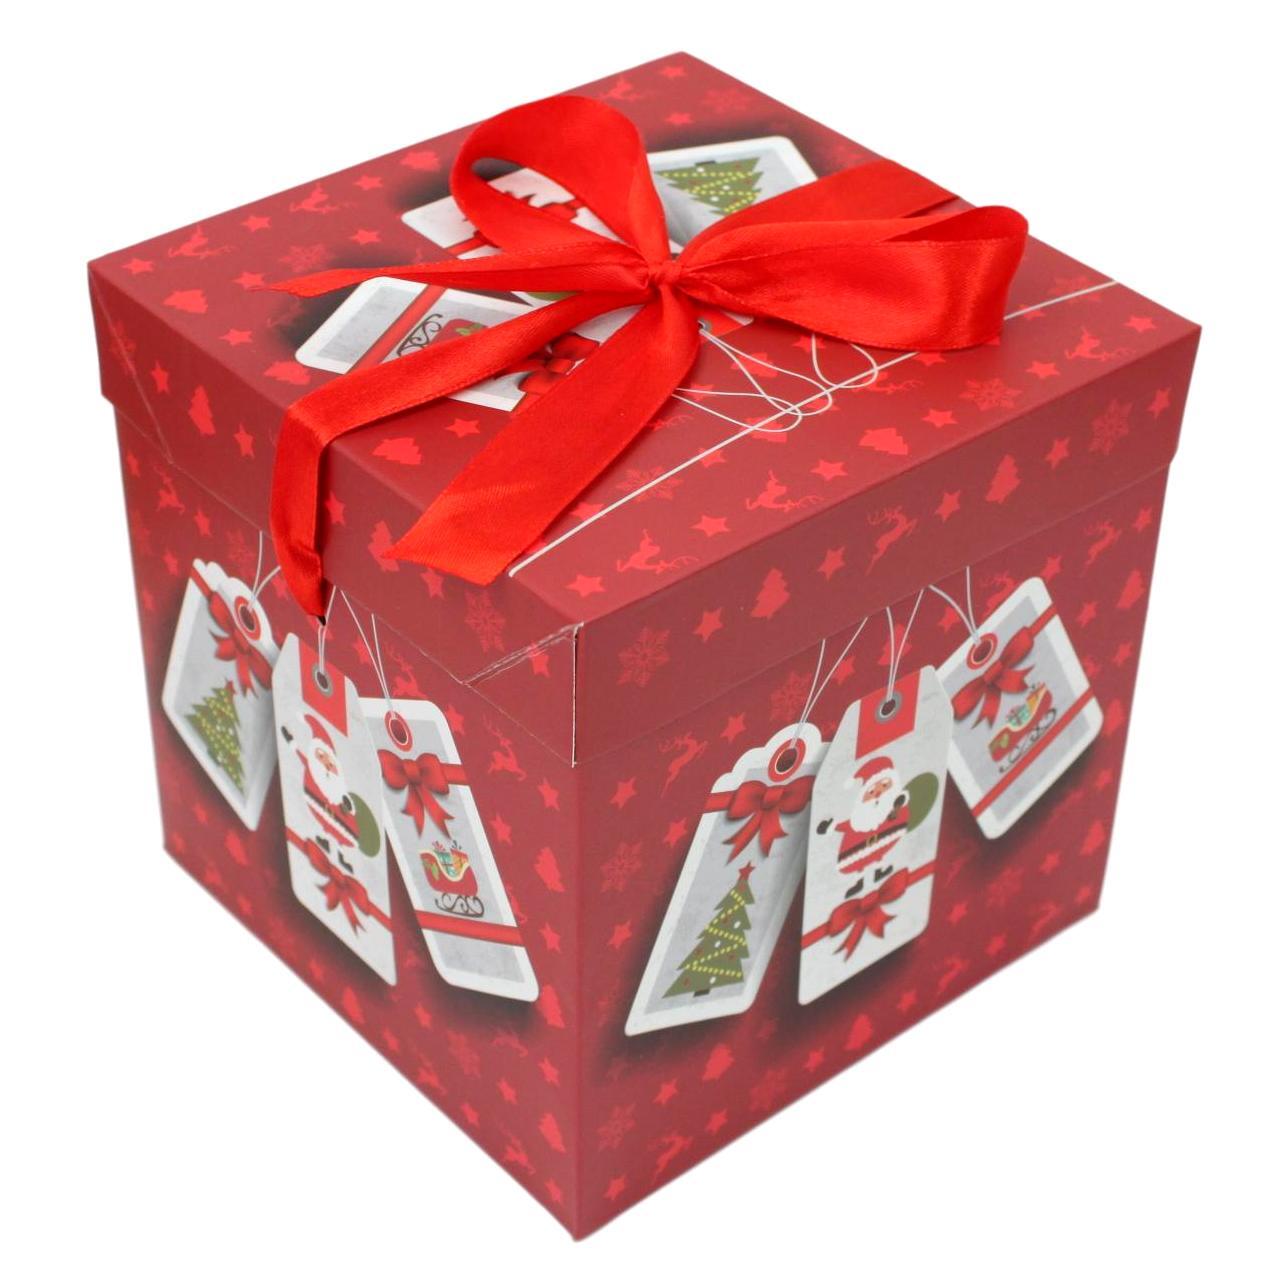 1pc/3pc Christmas Gift Box Large Present Wrapping Box